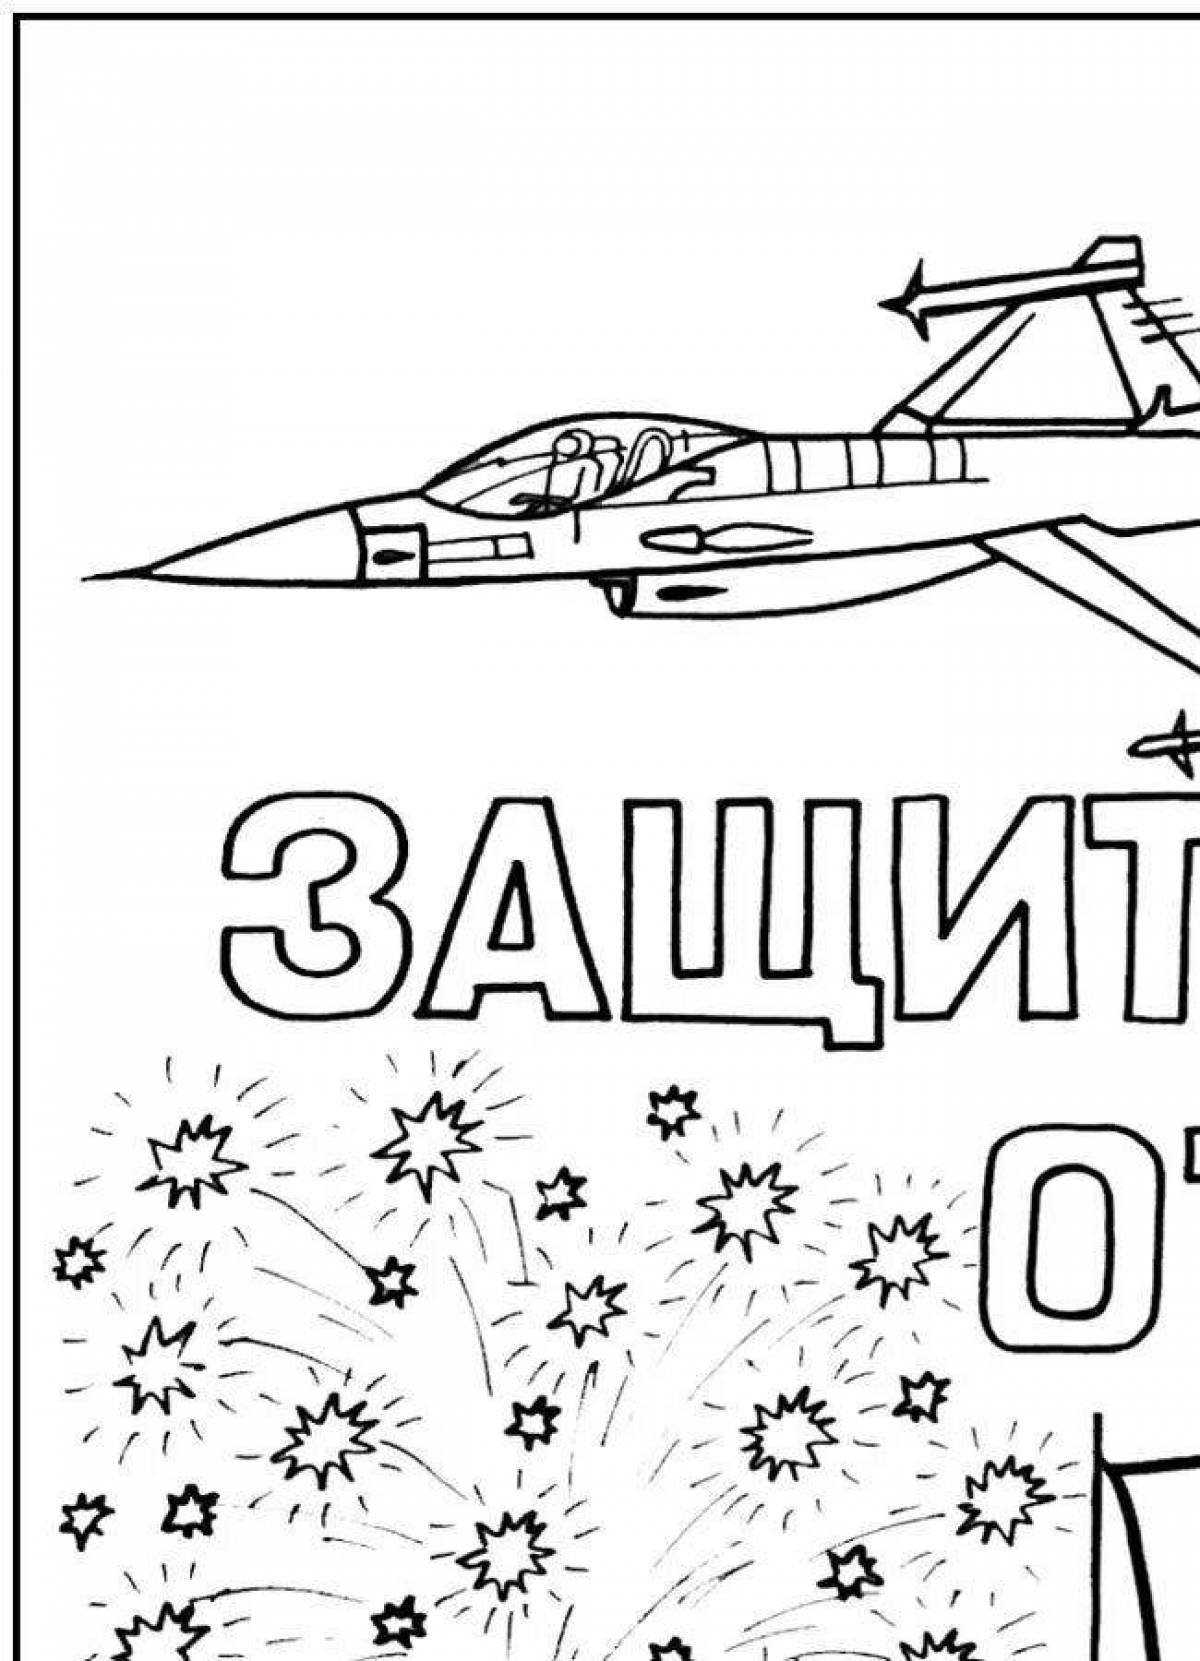 Fun coloring book for elementary school